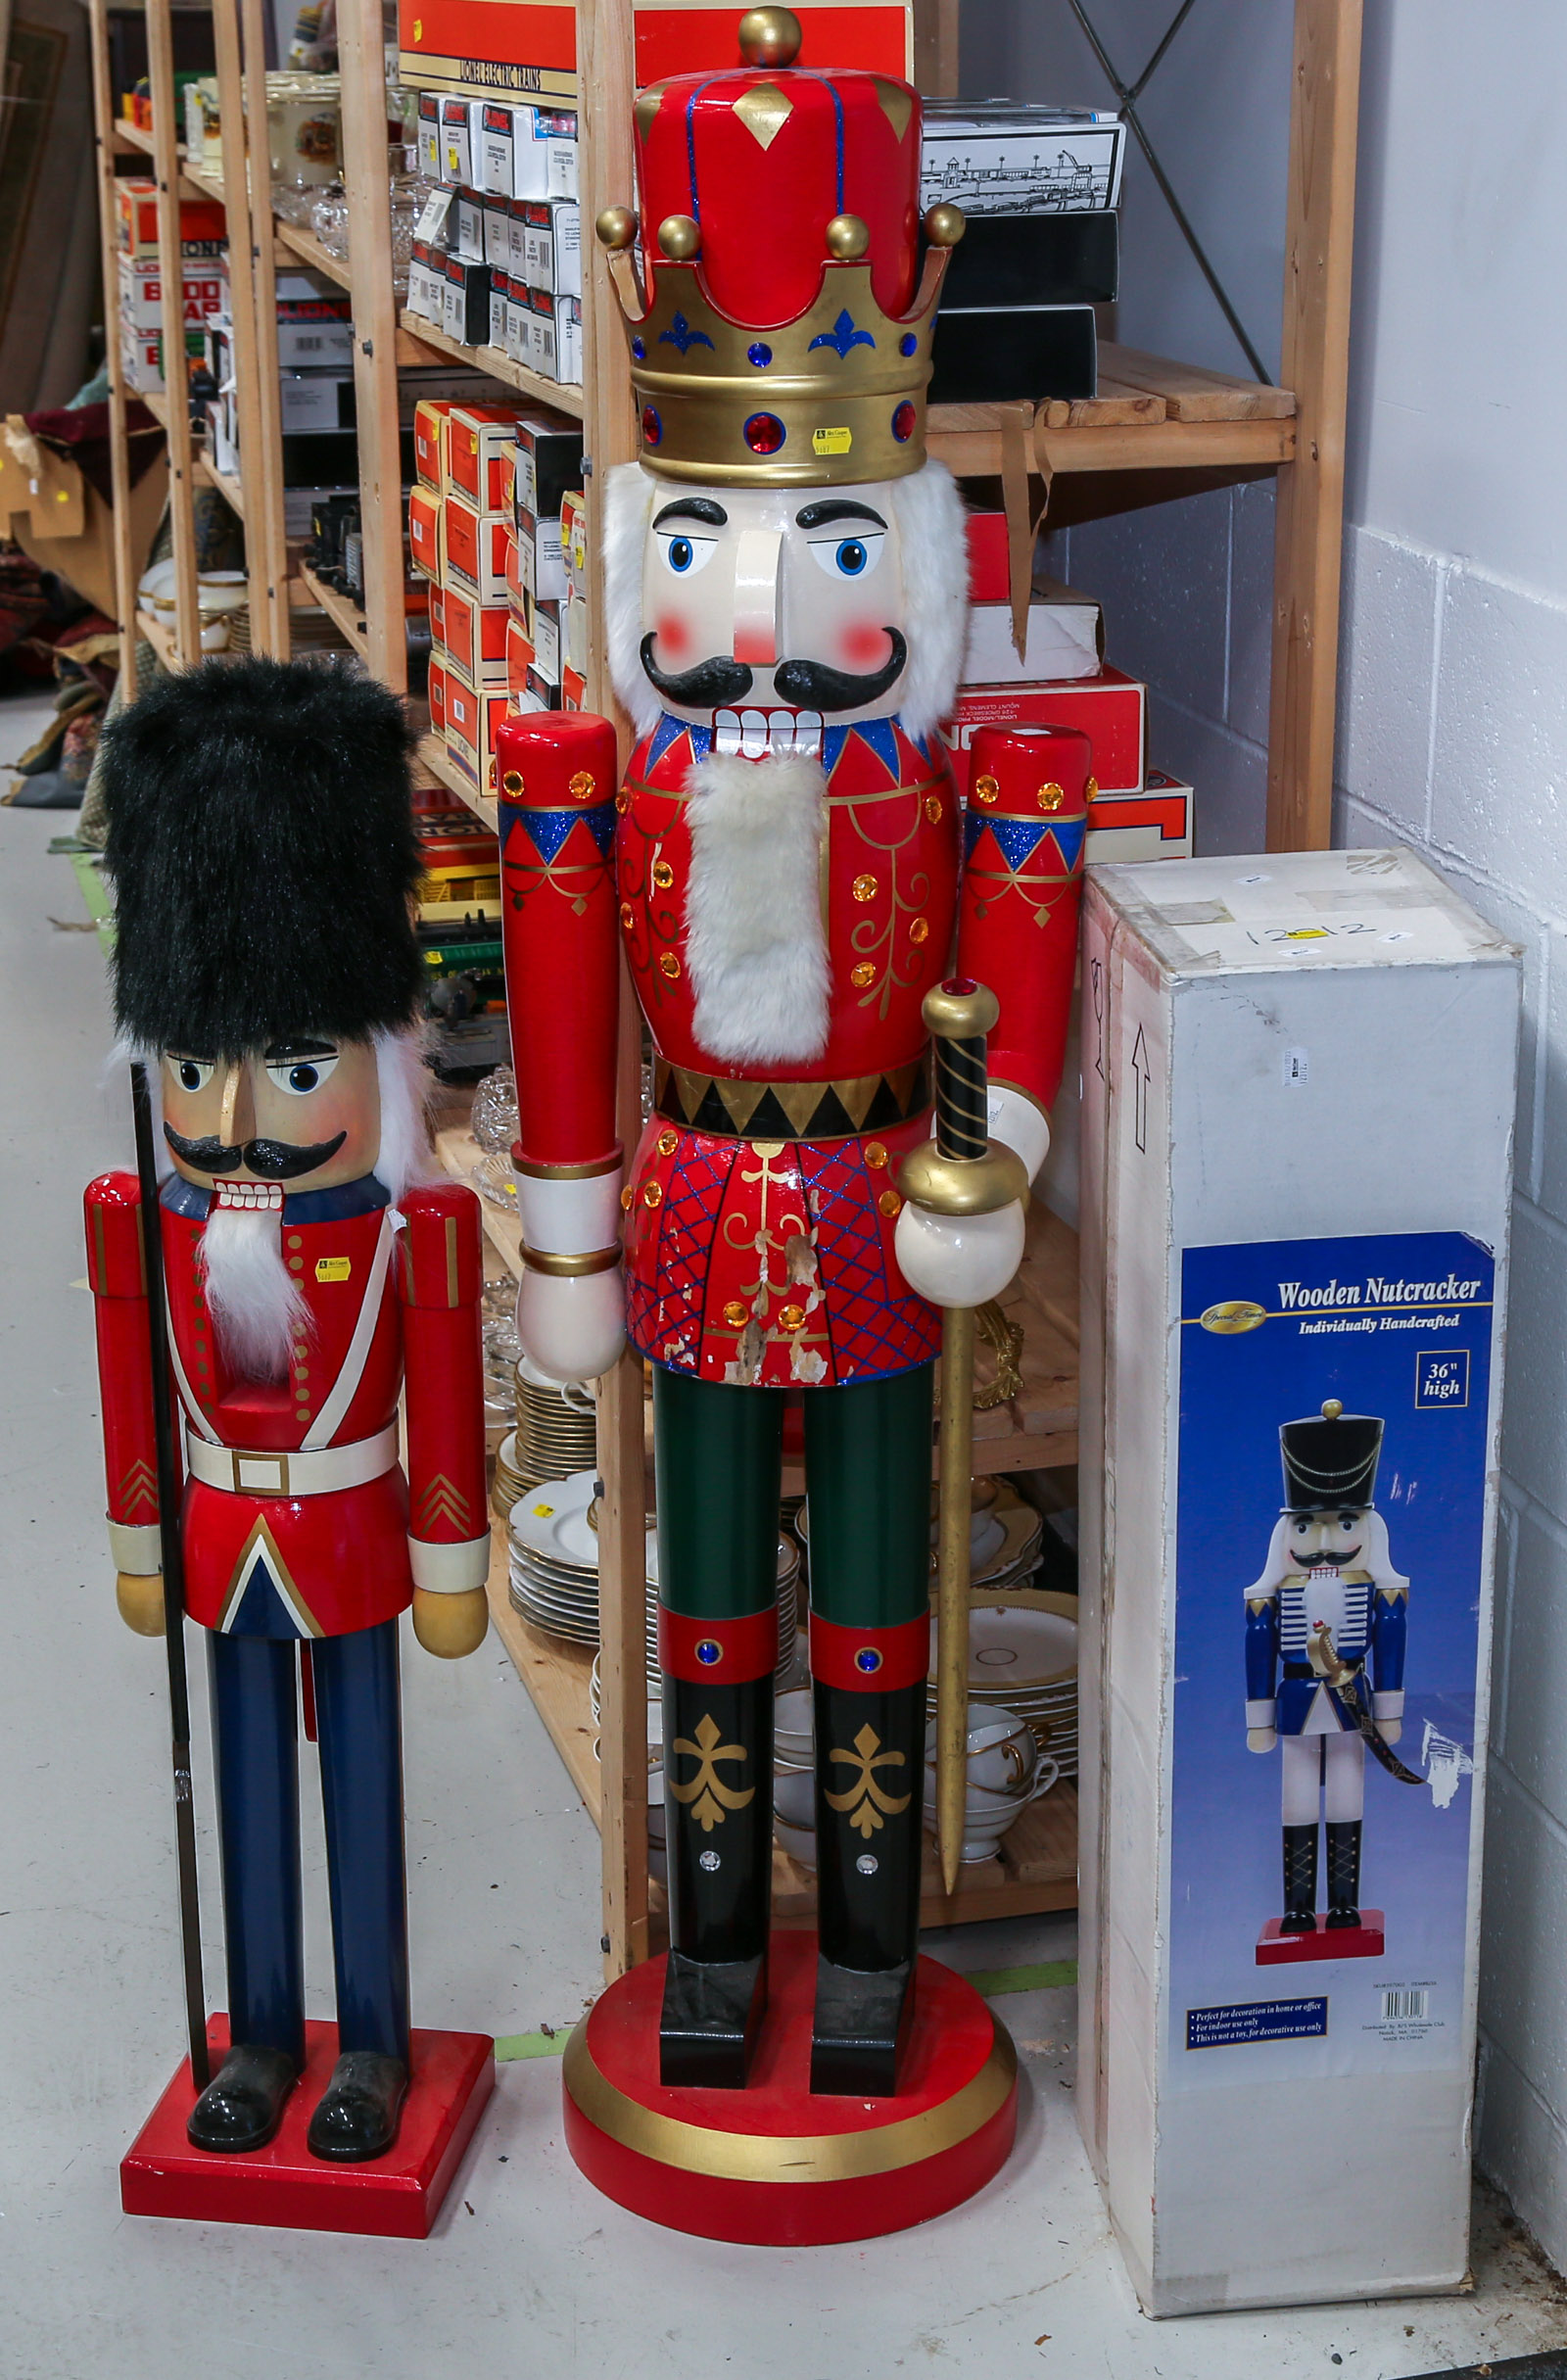 THREE LARGE WOODEN NUTCRACKERS One in